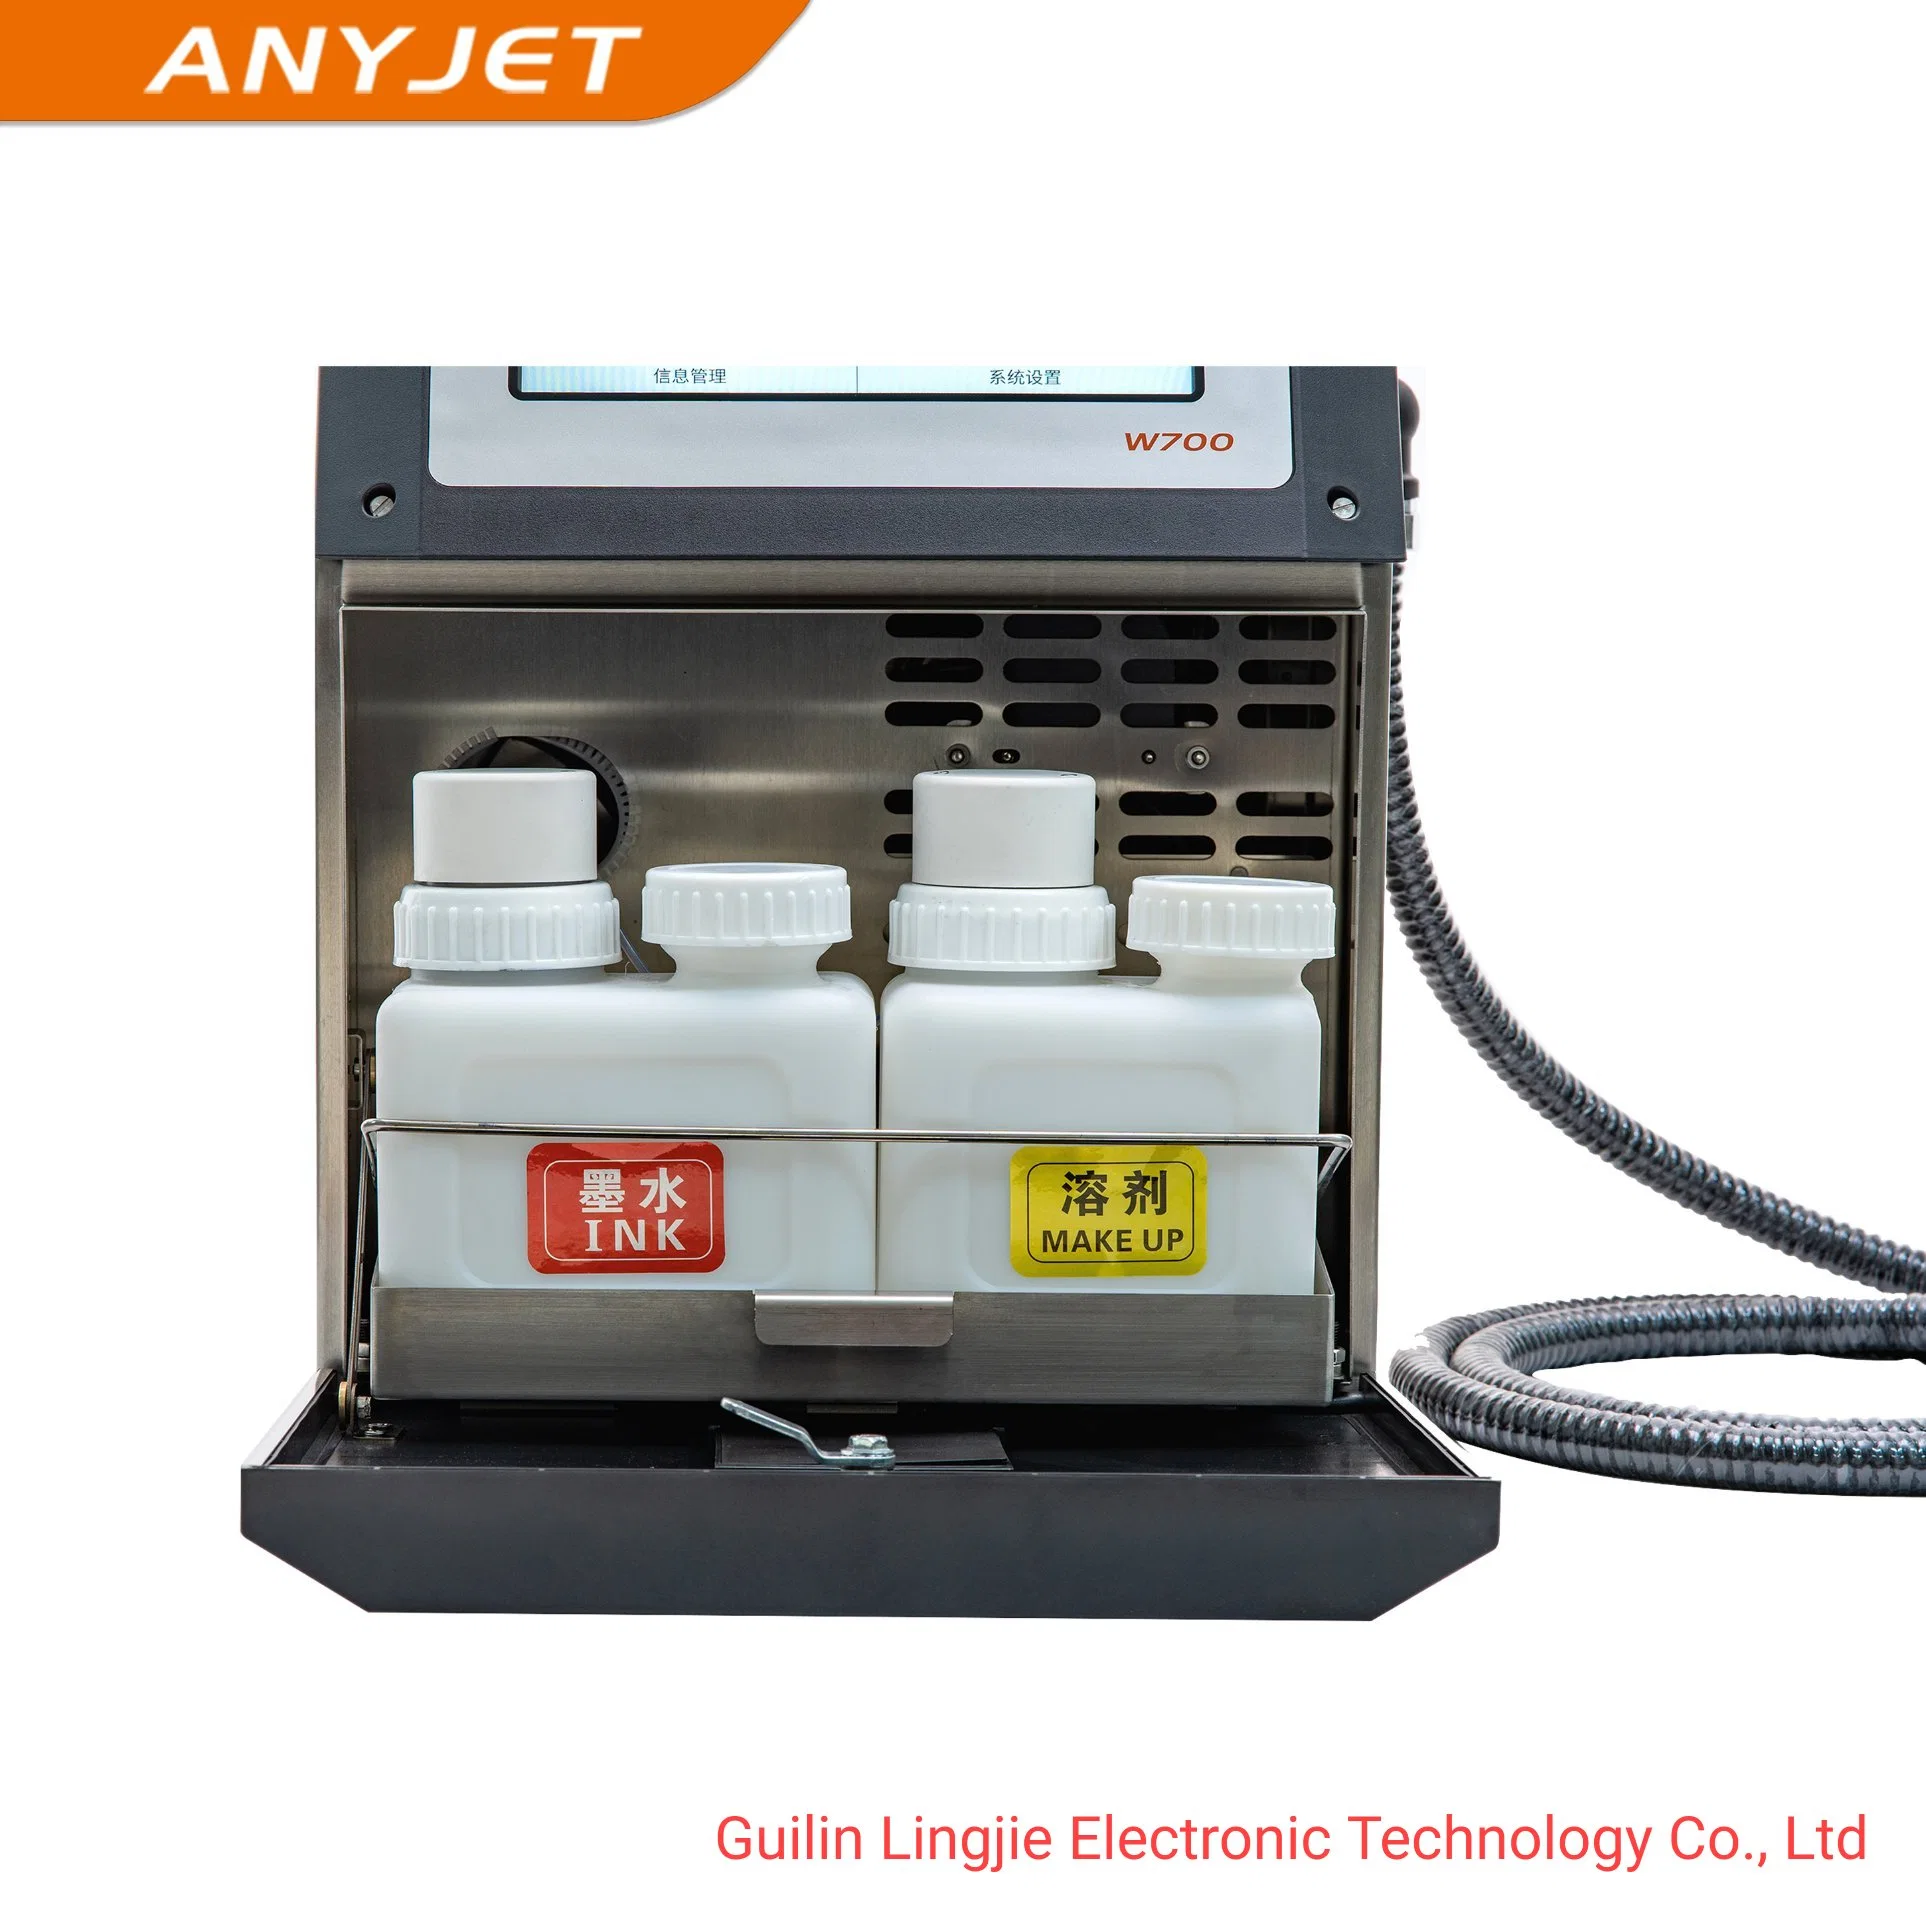 ANYJET Automatic Online Inkjet Code Printer for Time Date Printing Line